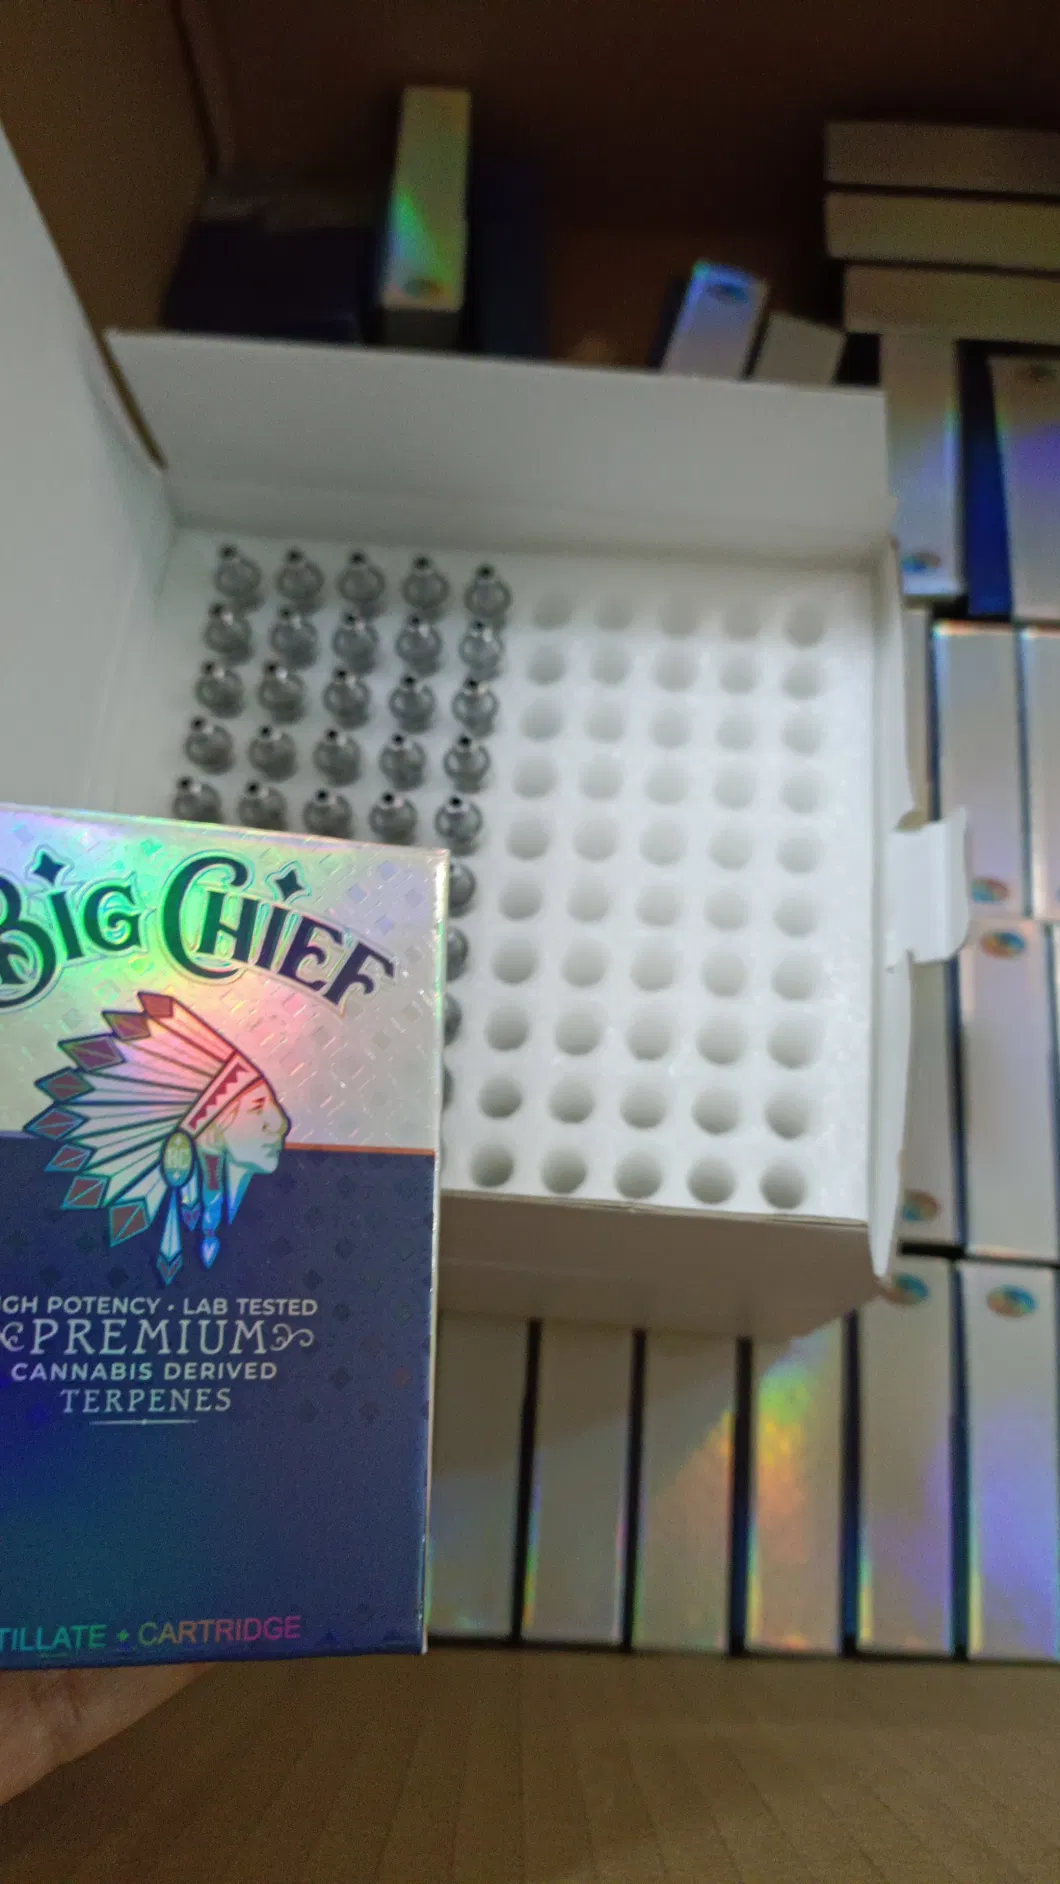 Big Chief Grand Daddy 1g Cart 510 Thread Atomizers Vape Cartridges Newest Packaging Empty E Cigarettes Kits White Window DAB Wax Thick Oil Vaporizer